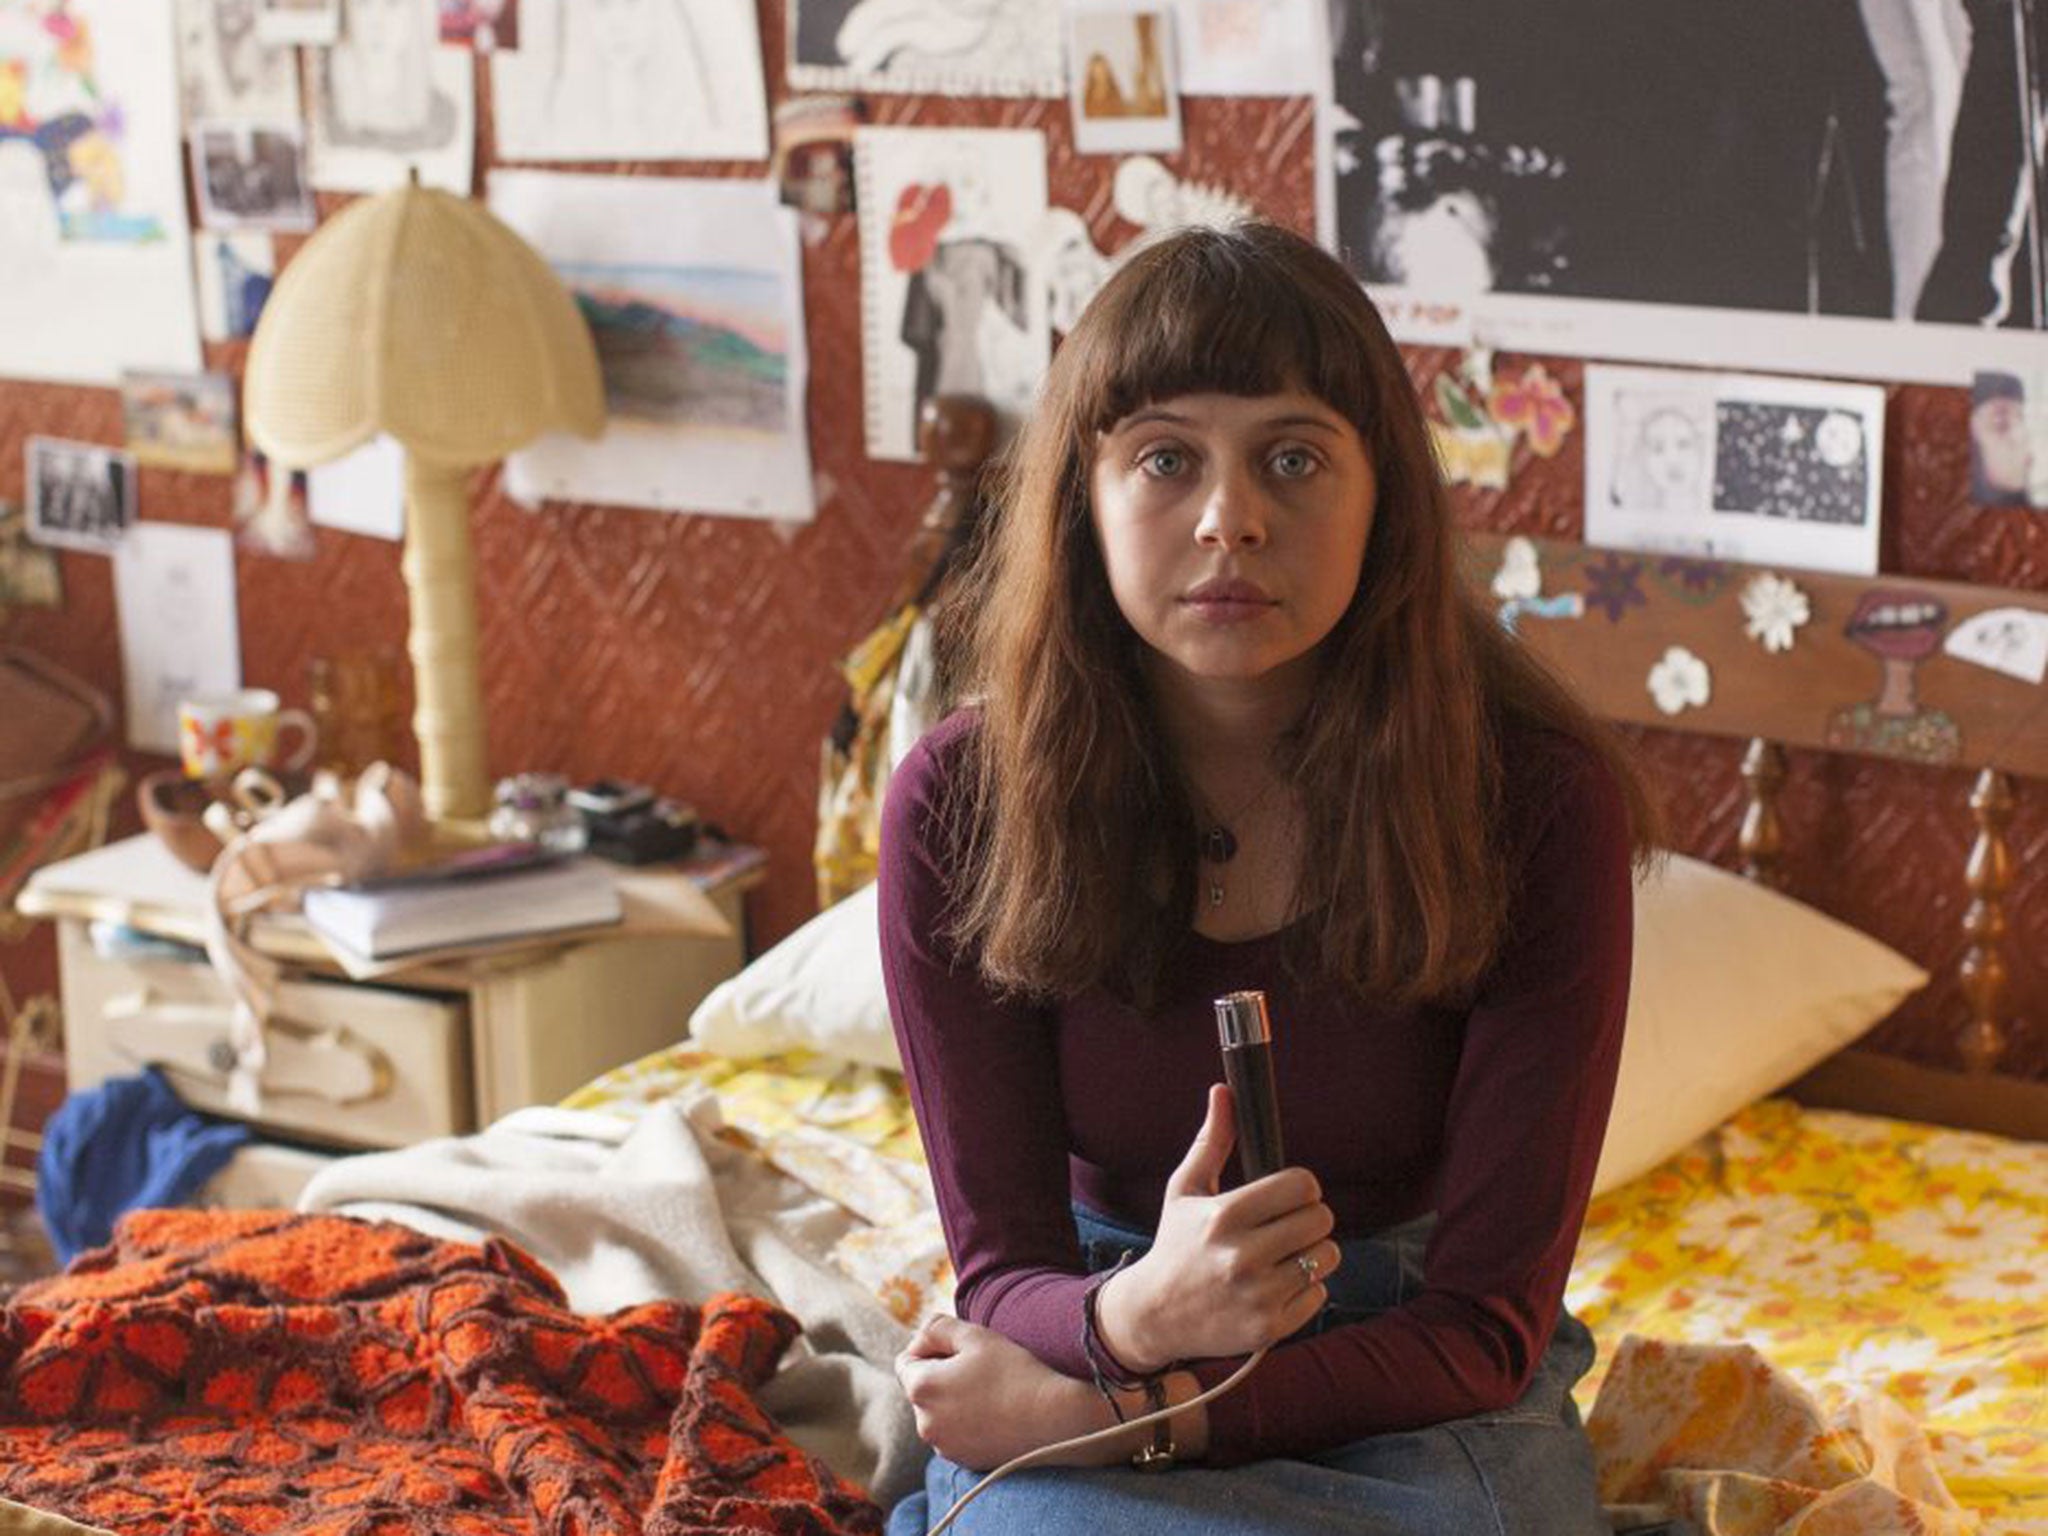 Minnie Goetz (Bel Powley) records her thoughts in ‘Diary of a Teenage Girl’